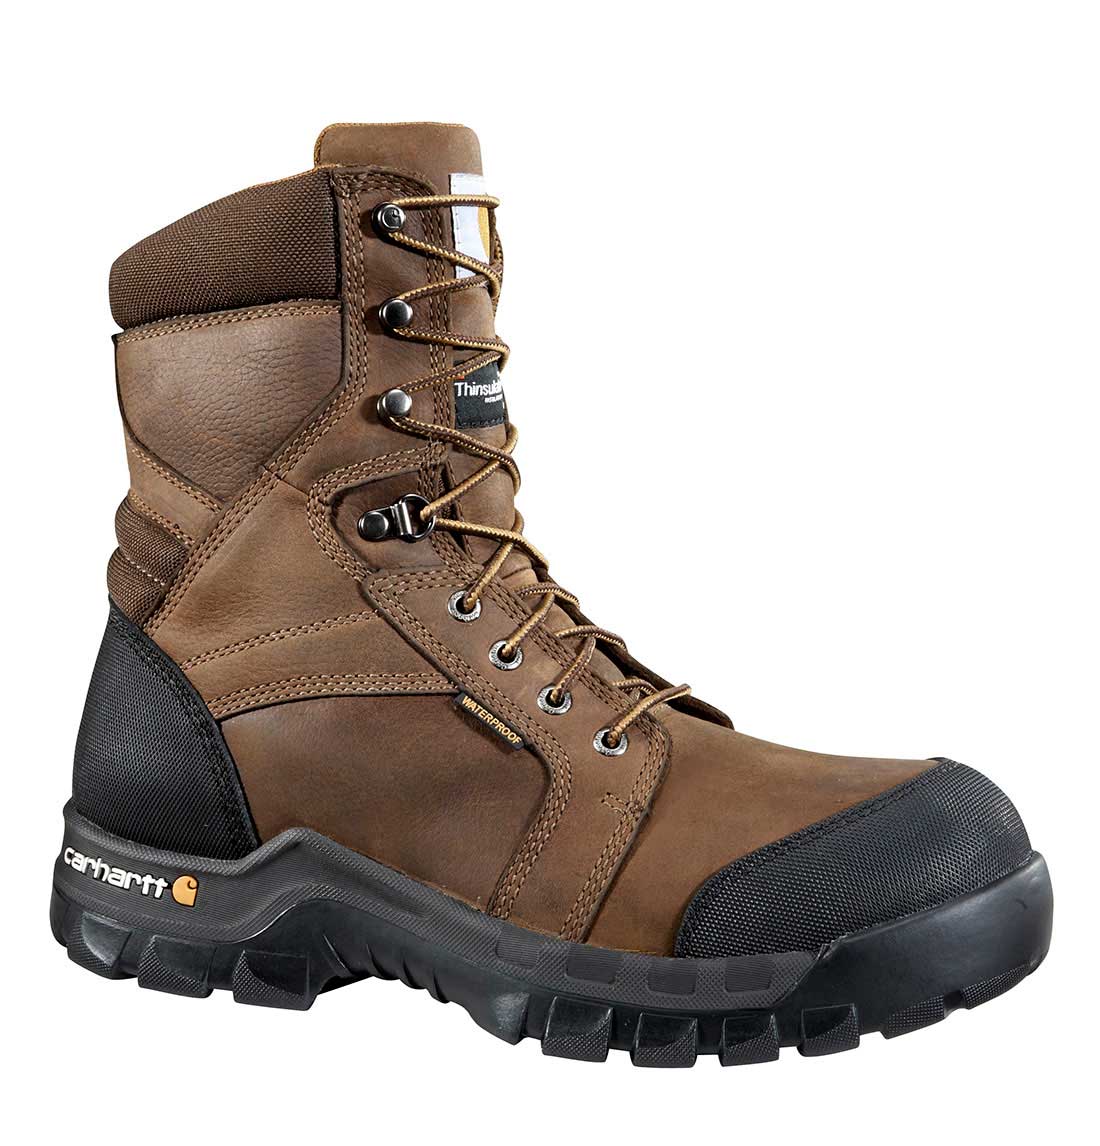 Carhartt - CMF8389 - Rugged Flex Men's Brown Leather Waterproof Insulated Composite Safety Toe 8 Lace-up Work Boot